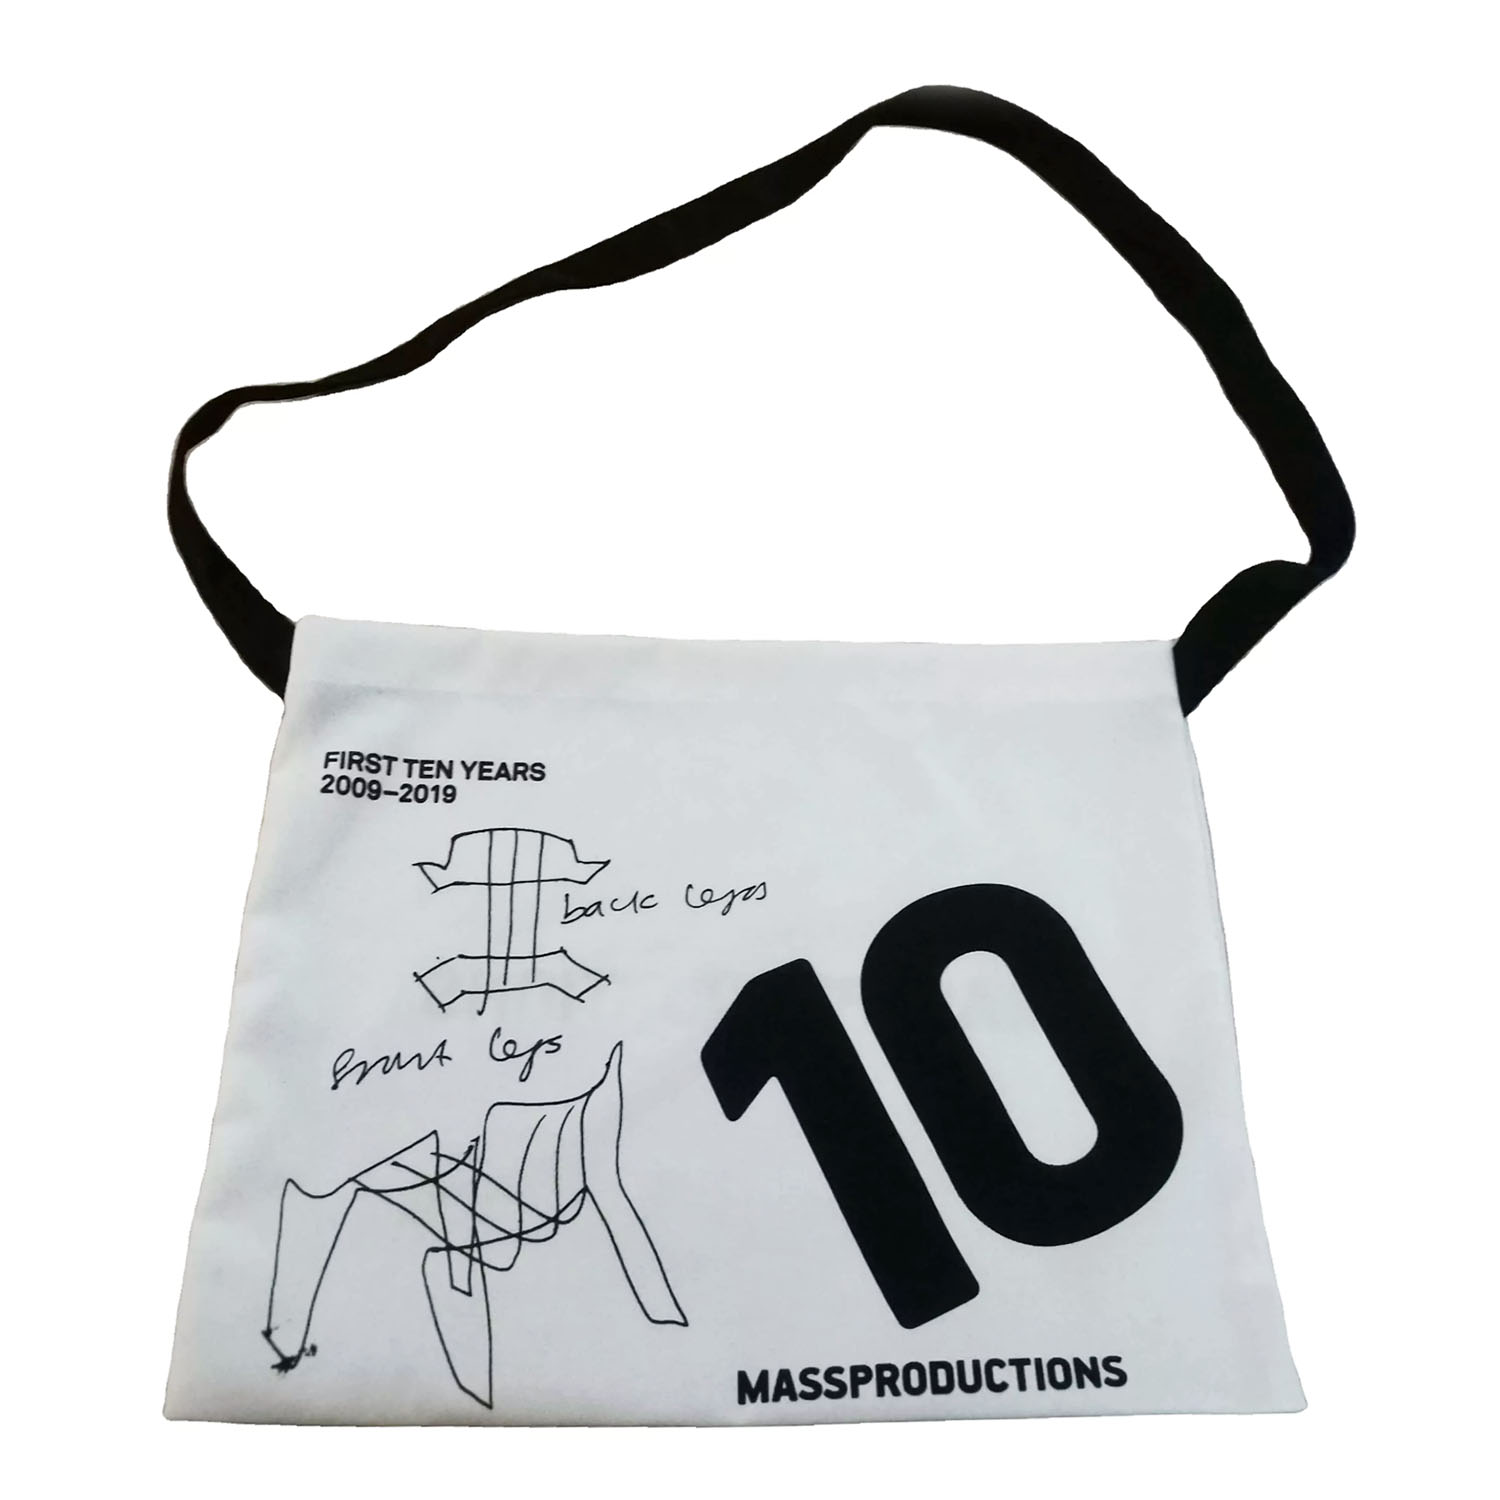 Example of custom printed musette cycling bag